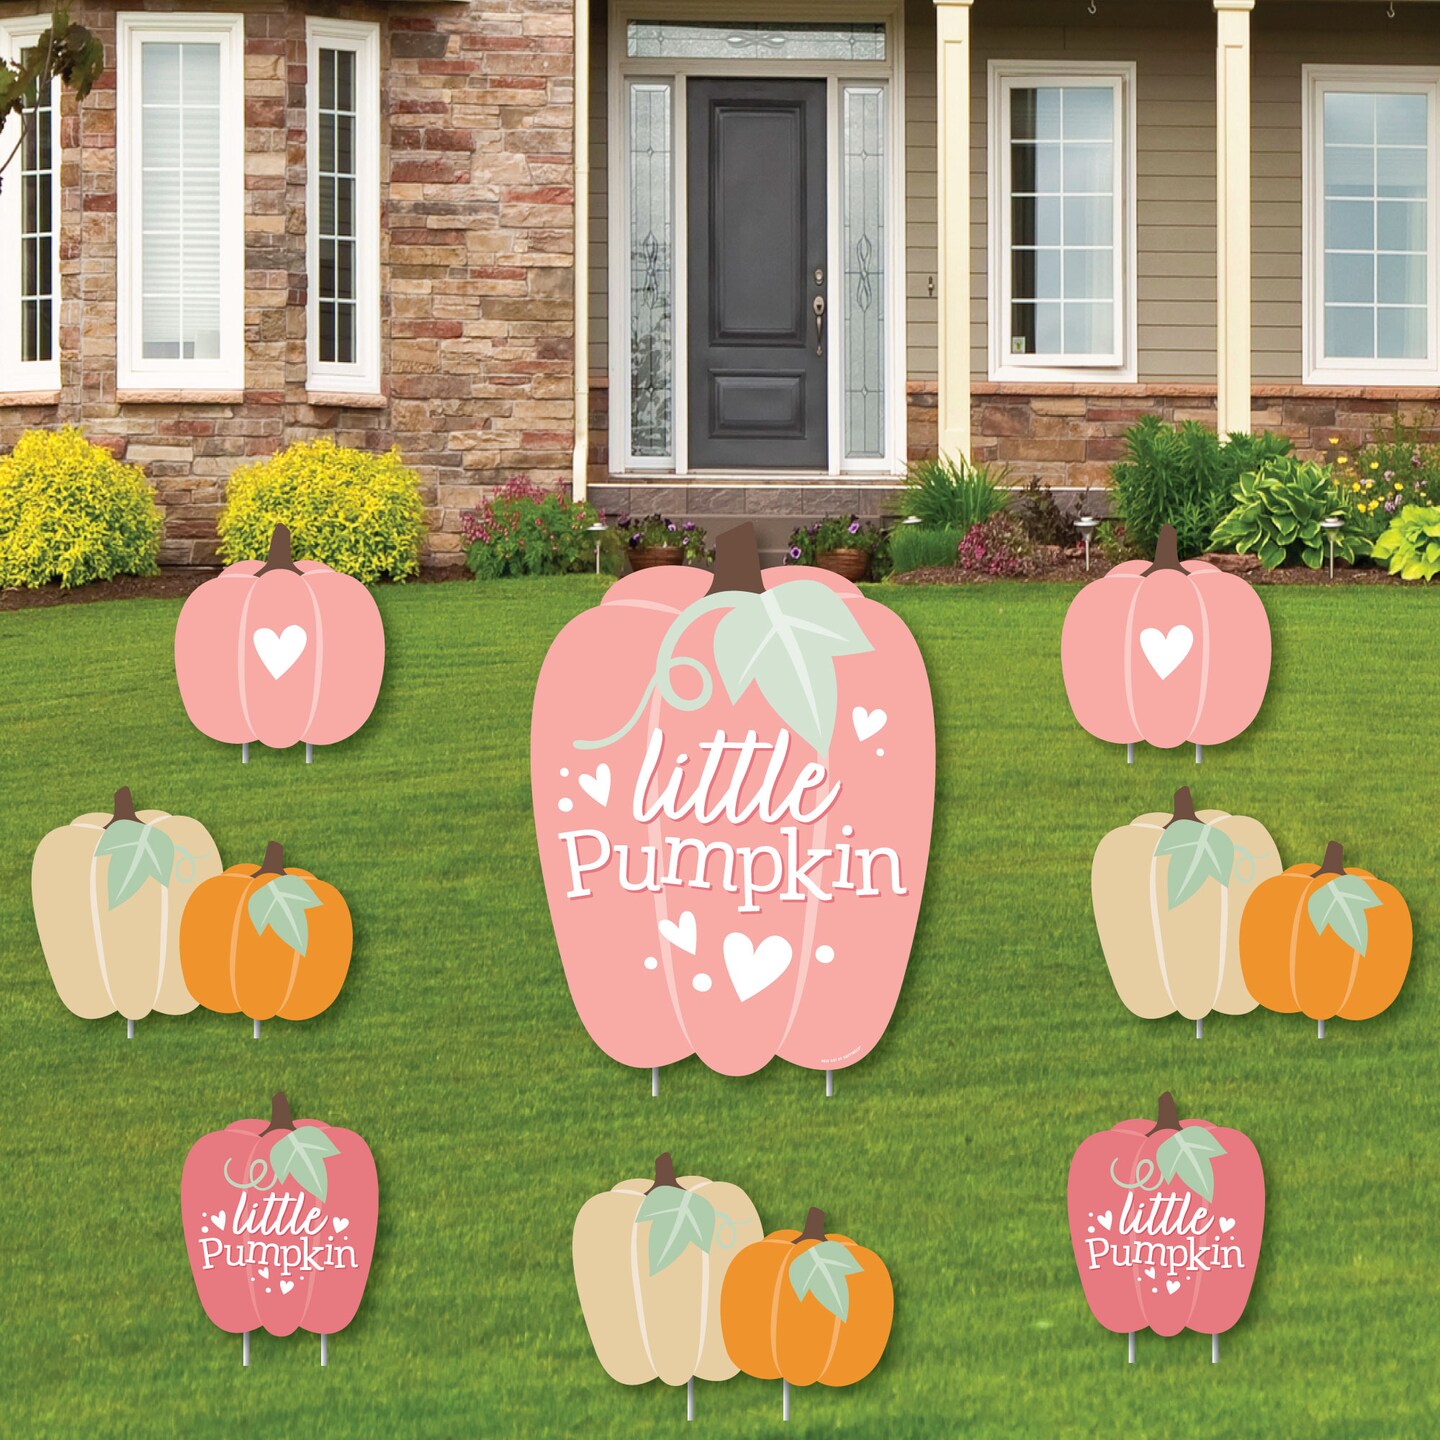 Big Dot of Happiness Girl Little Pumpkin - Yard Sign and Outdoor Lawn Decorations - Fall Birthday Party or Baby Shower Yard Signs - Set of 8